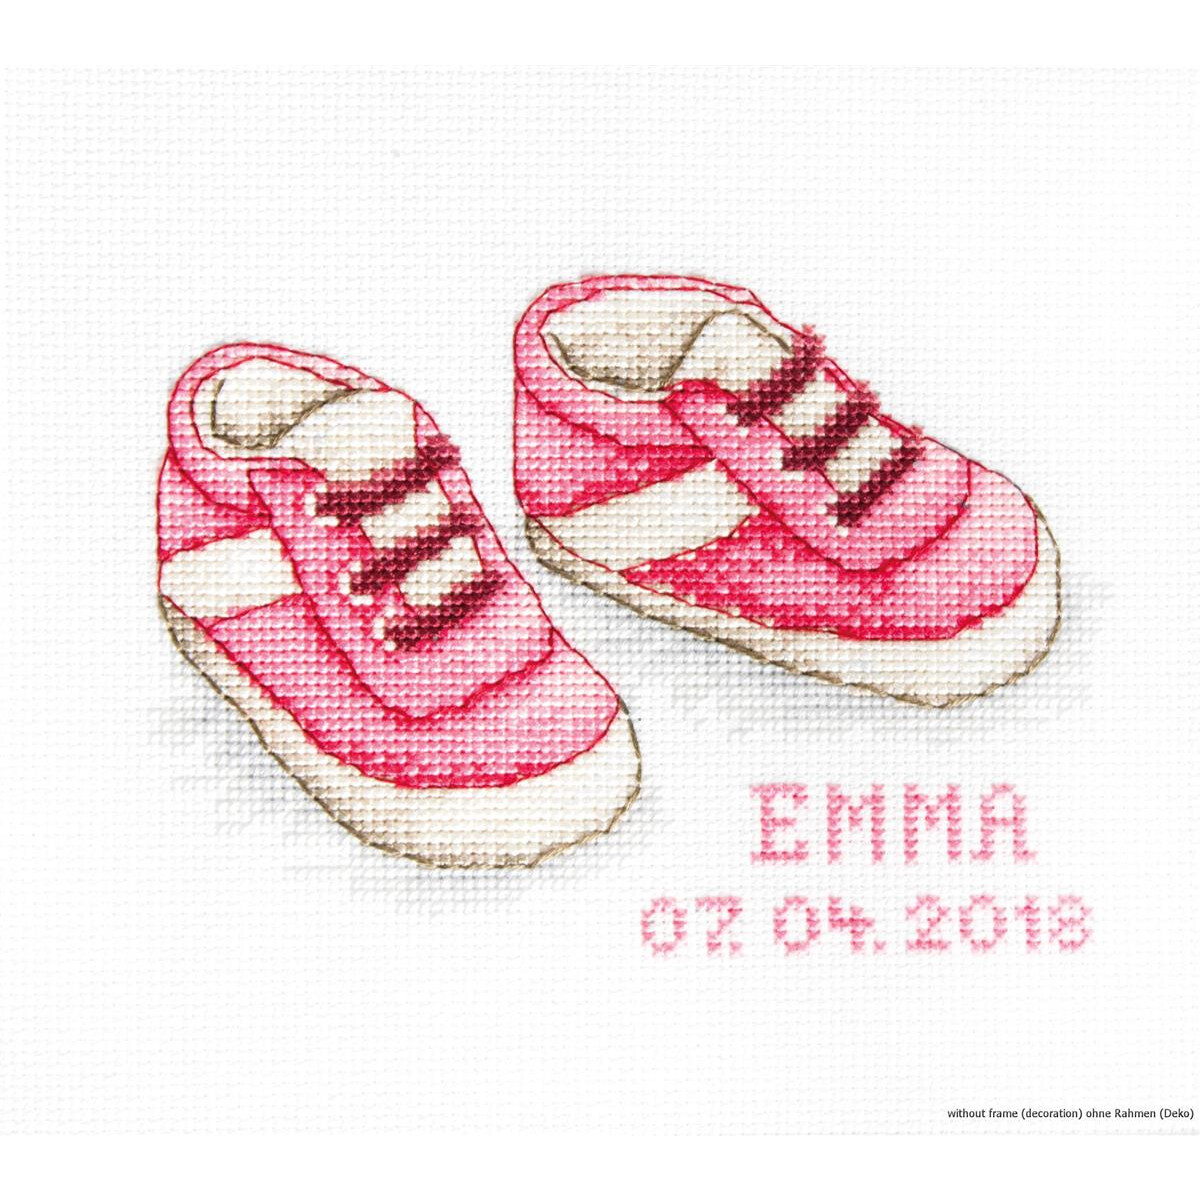 Luca-S counted Cross Stitch kit "Baby Shoes...